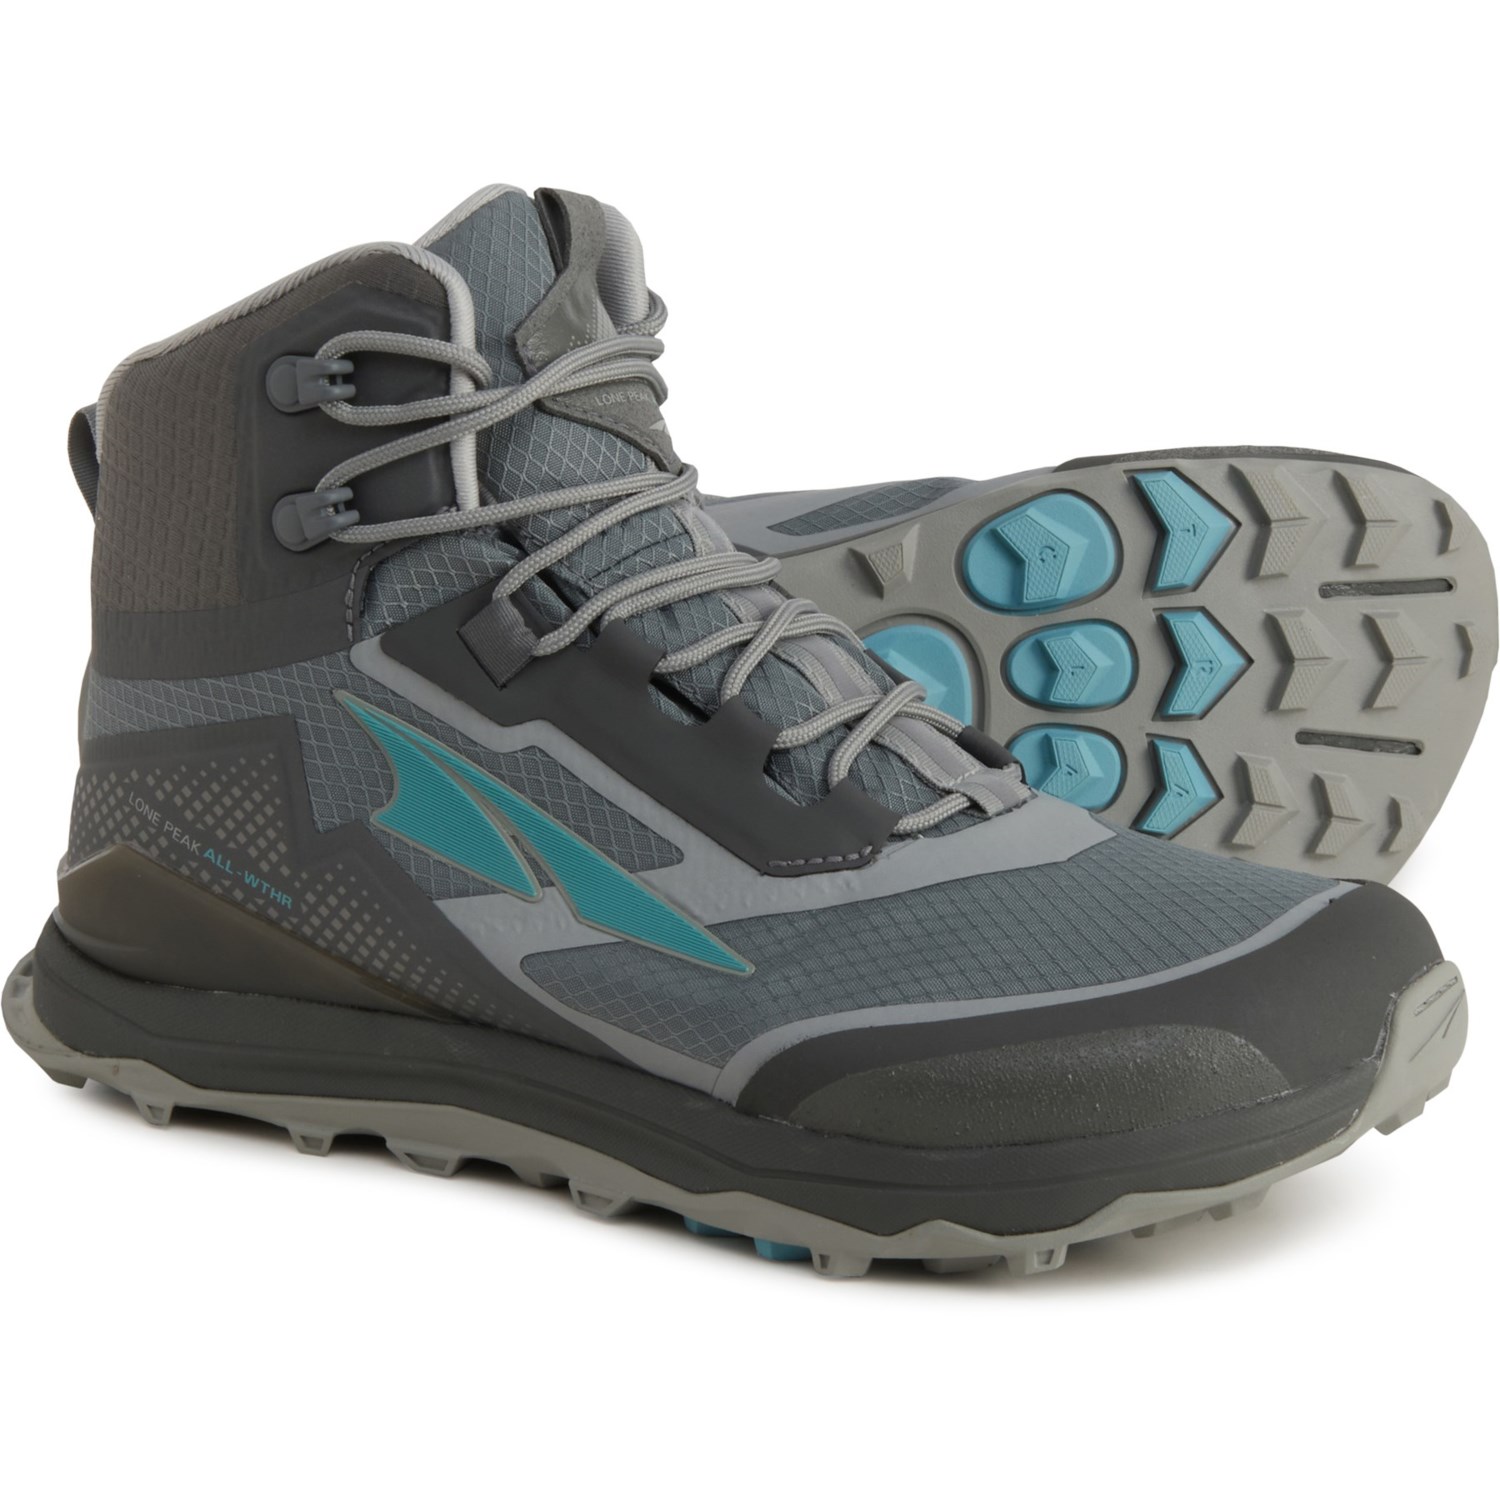 Altra Lone Peak All-Weather Mid Hiking Boots (For Women) - Save 40%